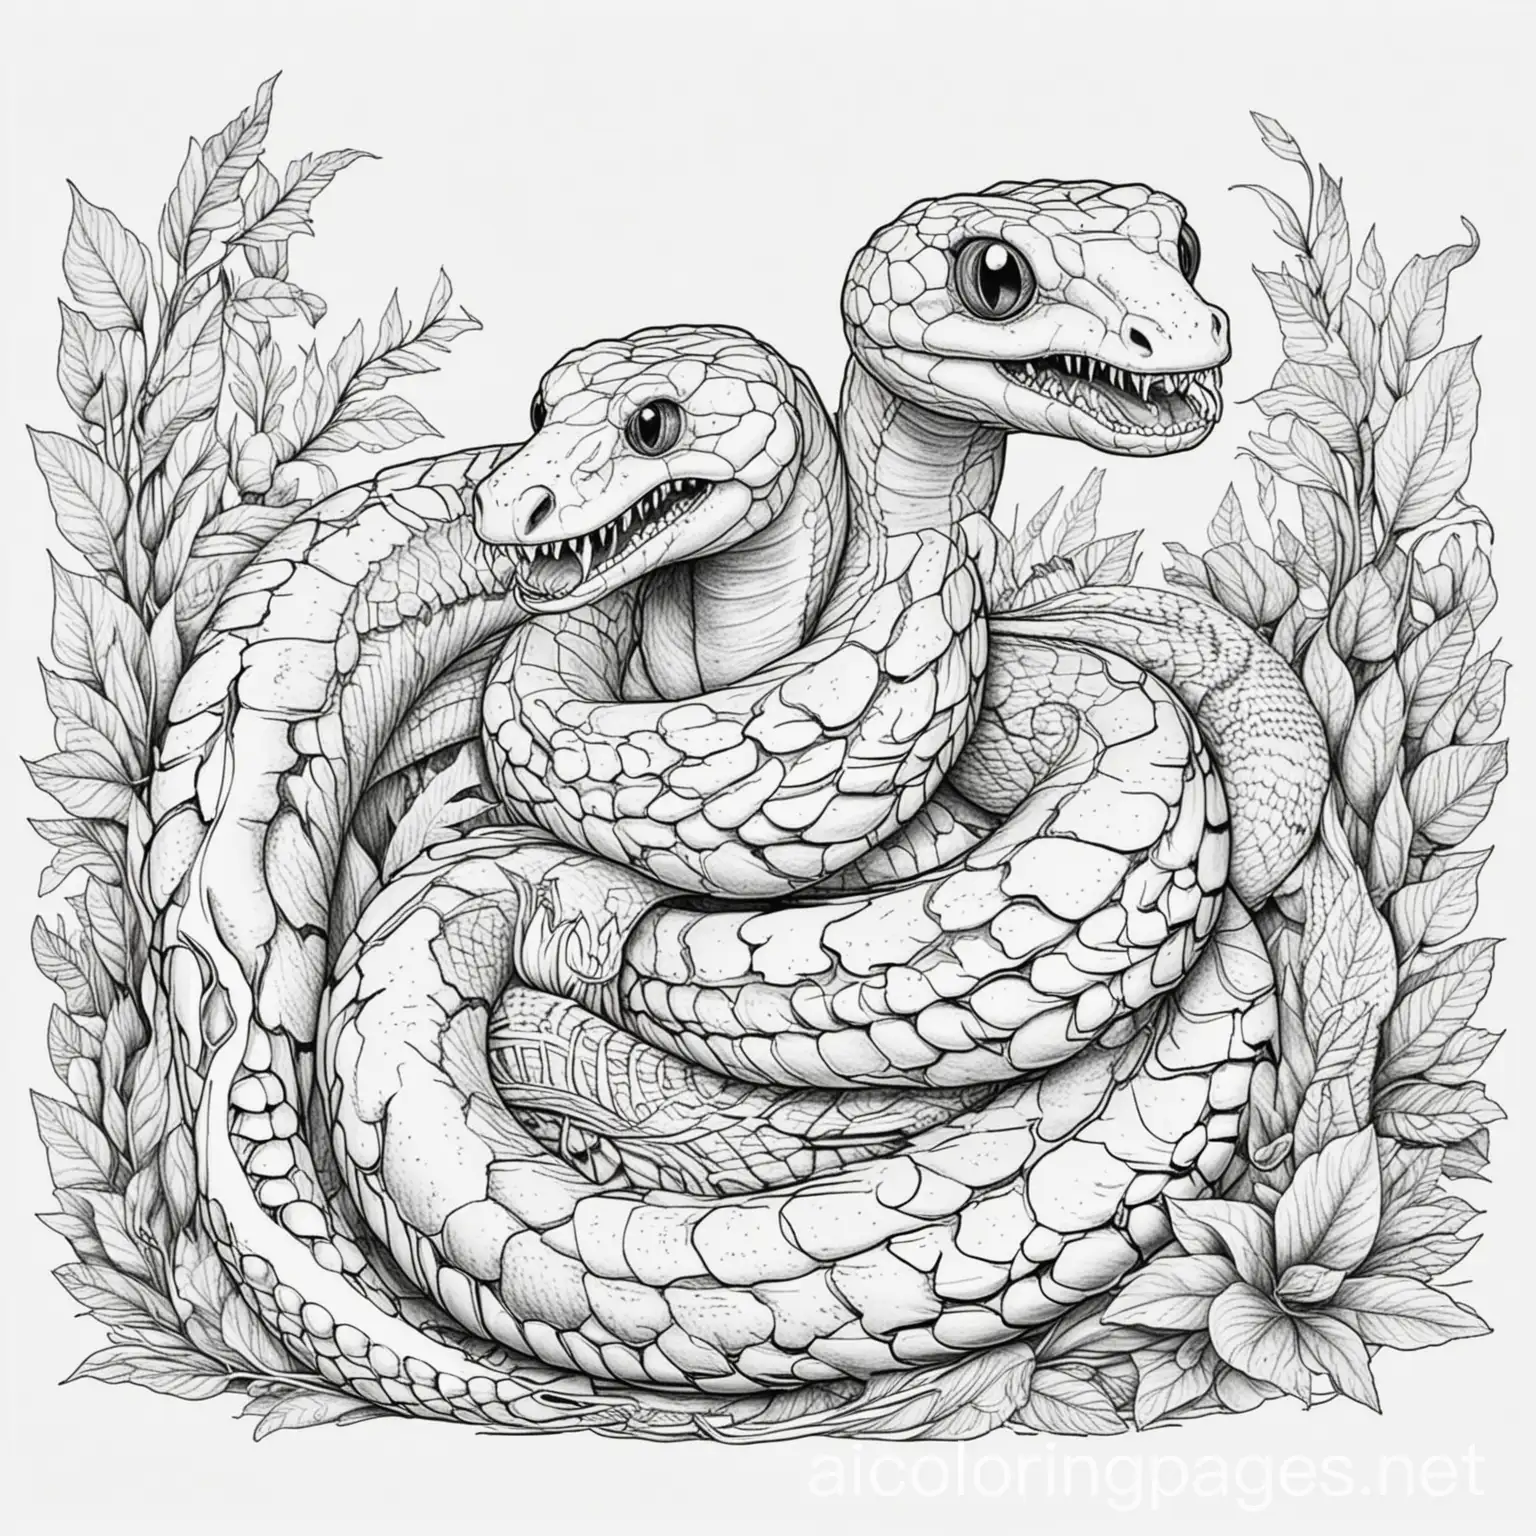 Scary-and-Pretty-Snakes-Coloring-Page-Line-Art-for-Young-Children